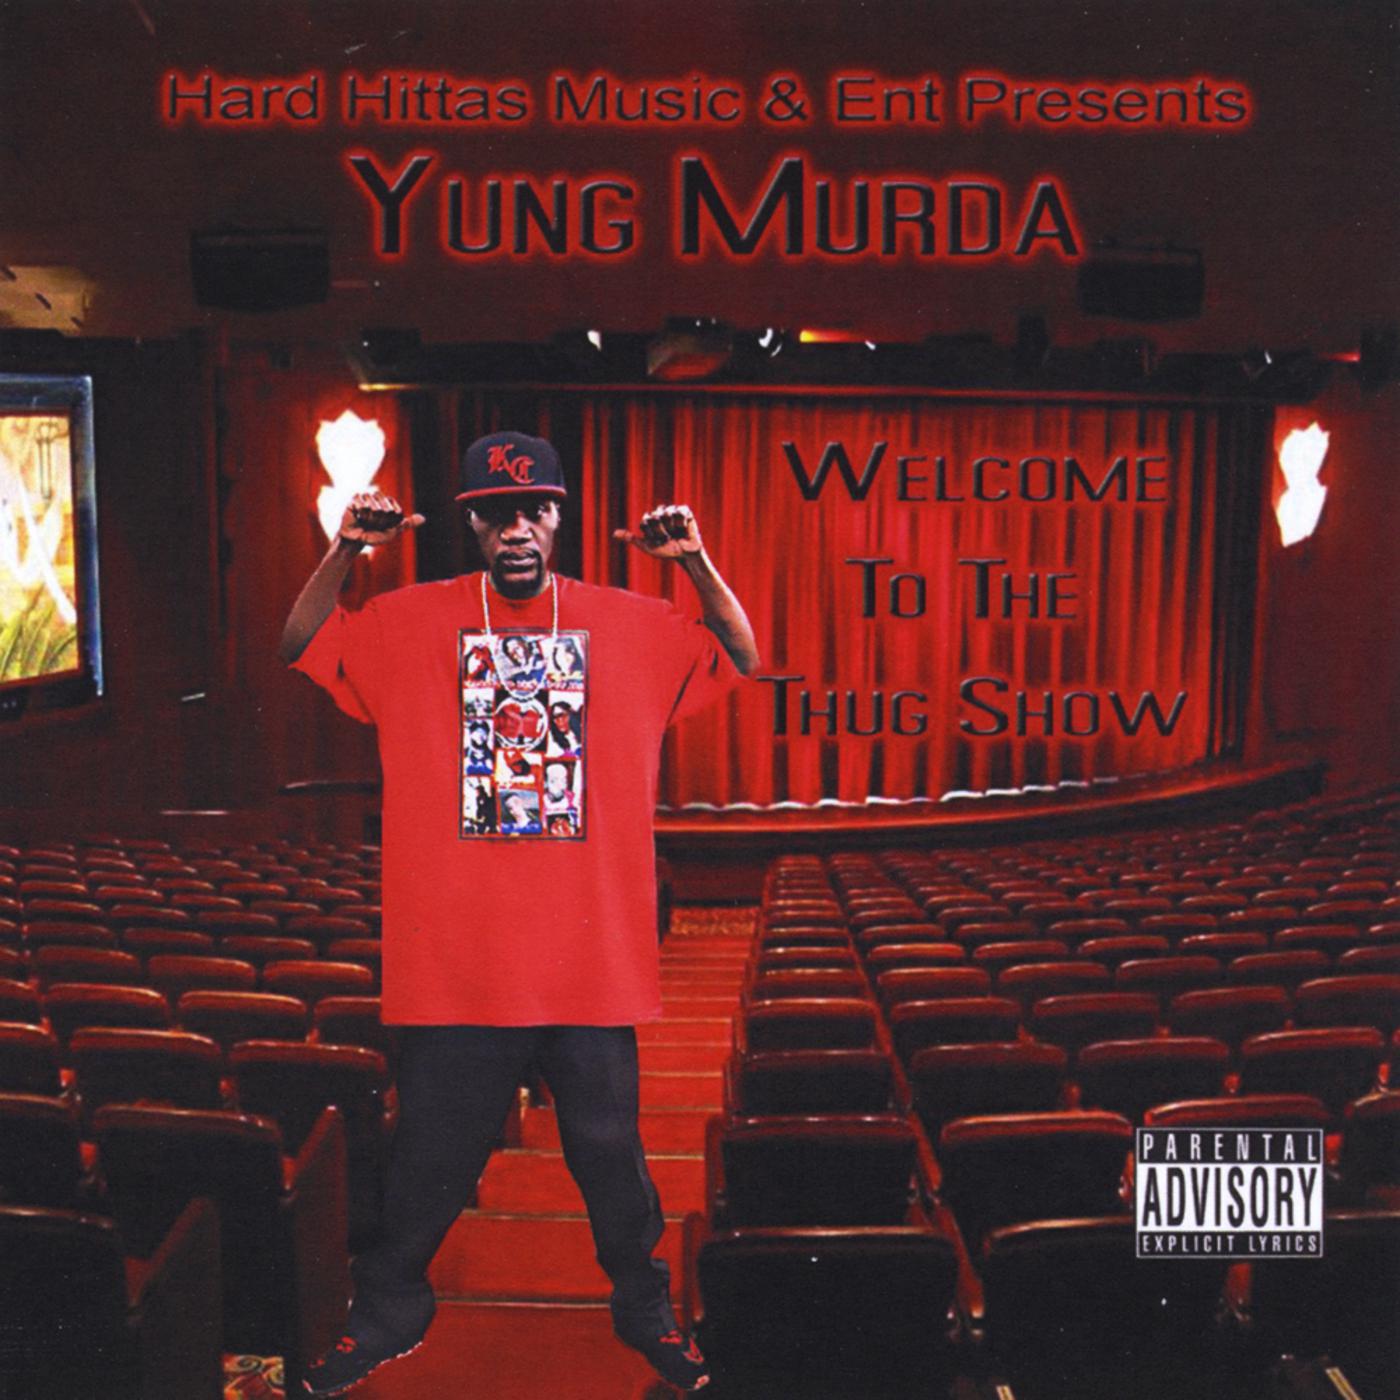 Yung Murda - Cold Piece of Work (feat. Charm, Marvaless & Envy)